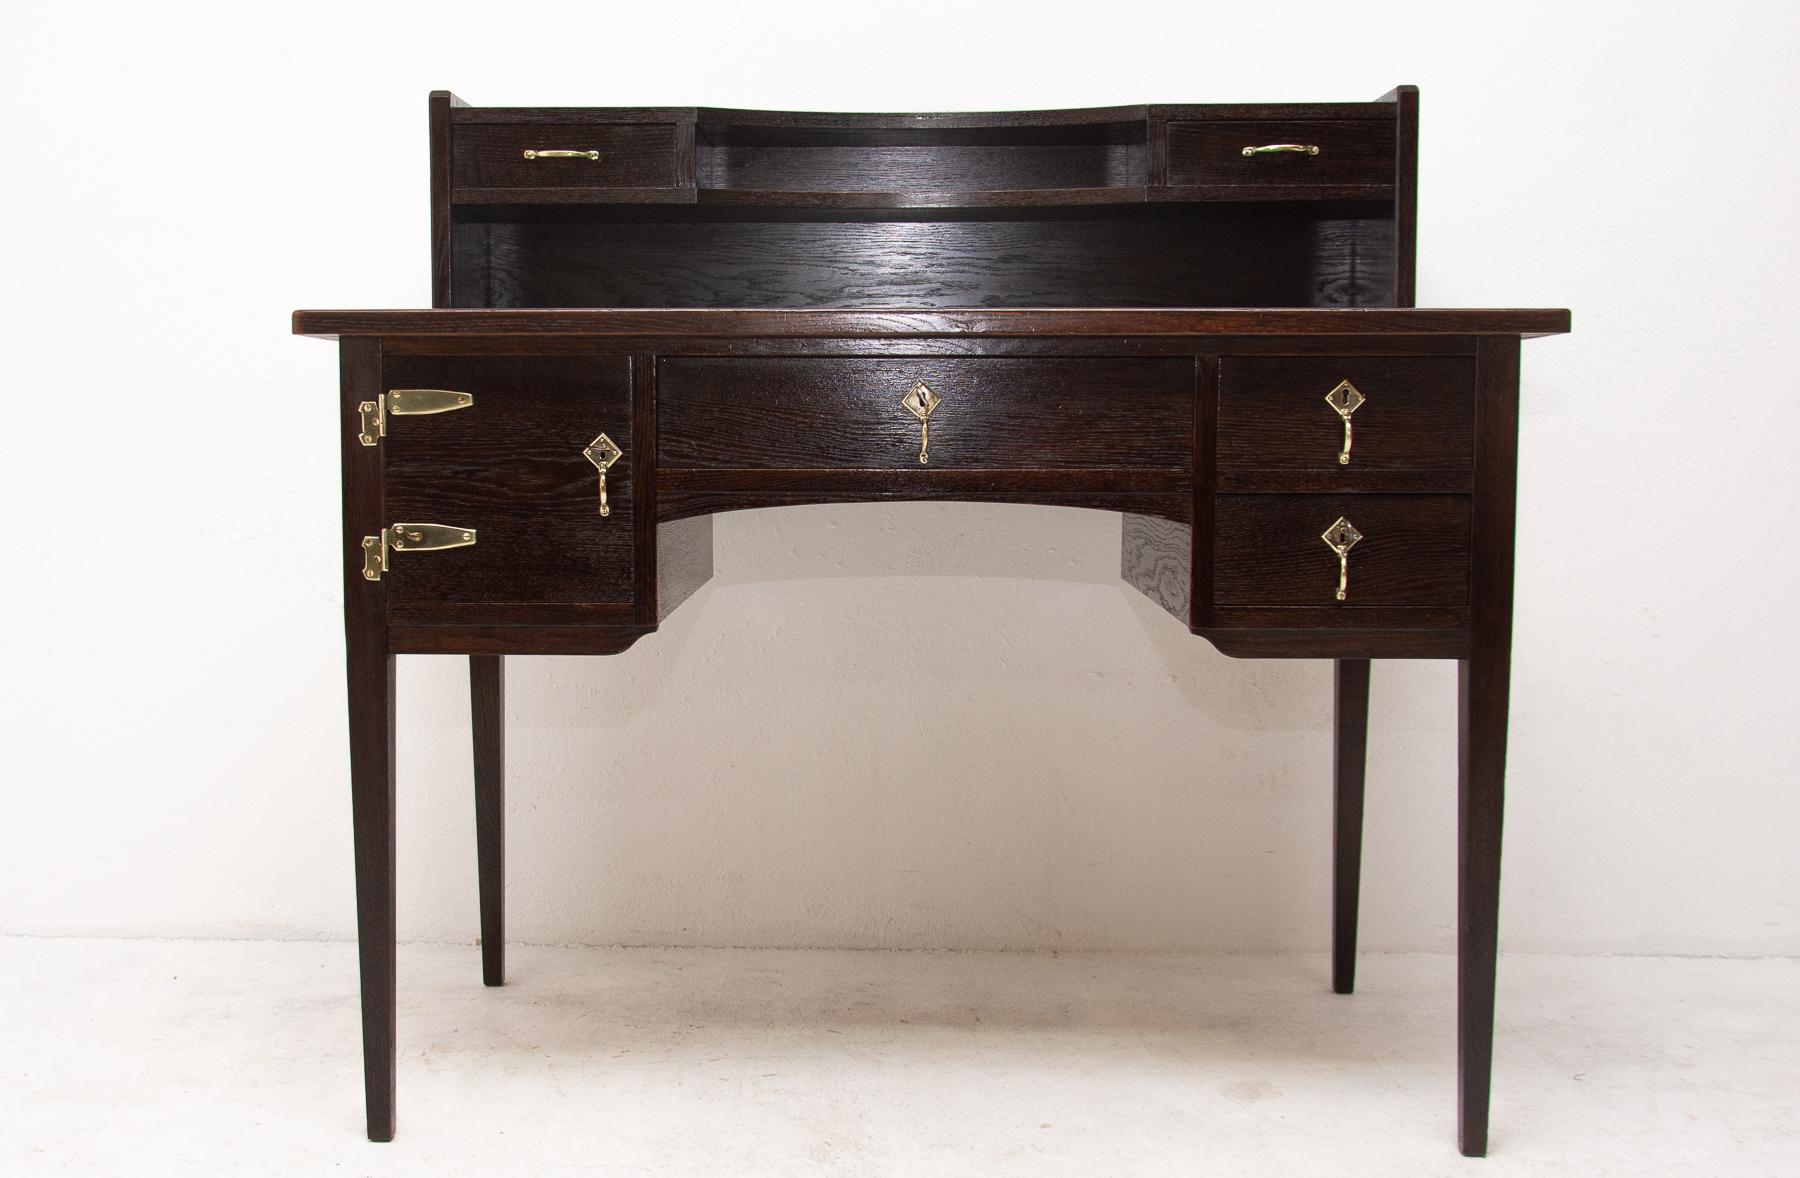 Early 20th Century Viennese Secession Ladies Writing Desk with Armchair (Wiener Secession)